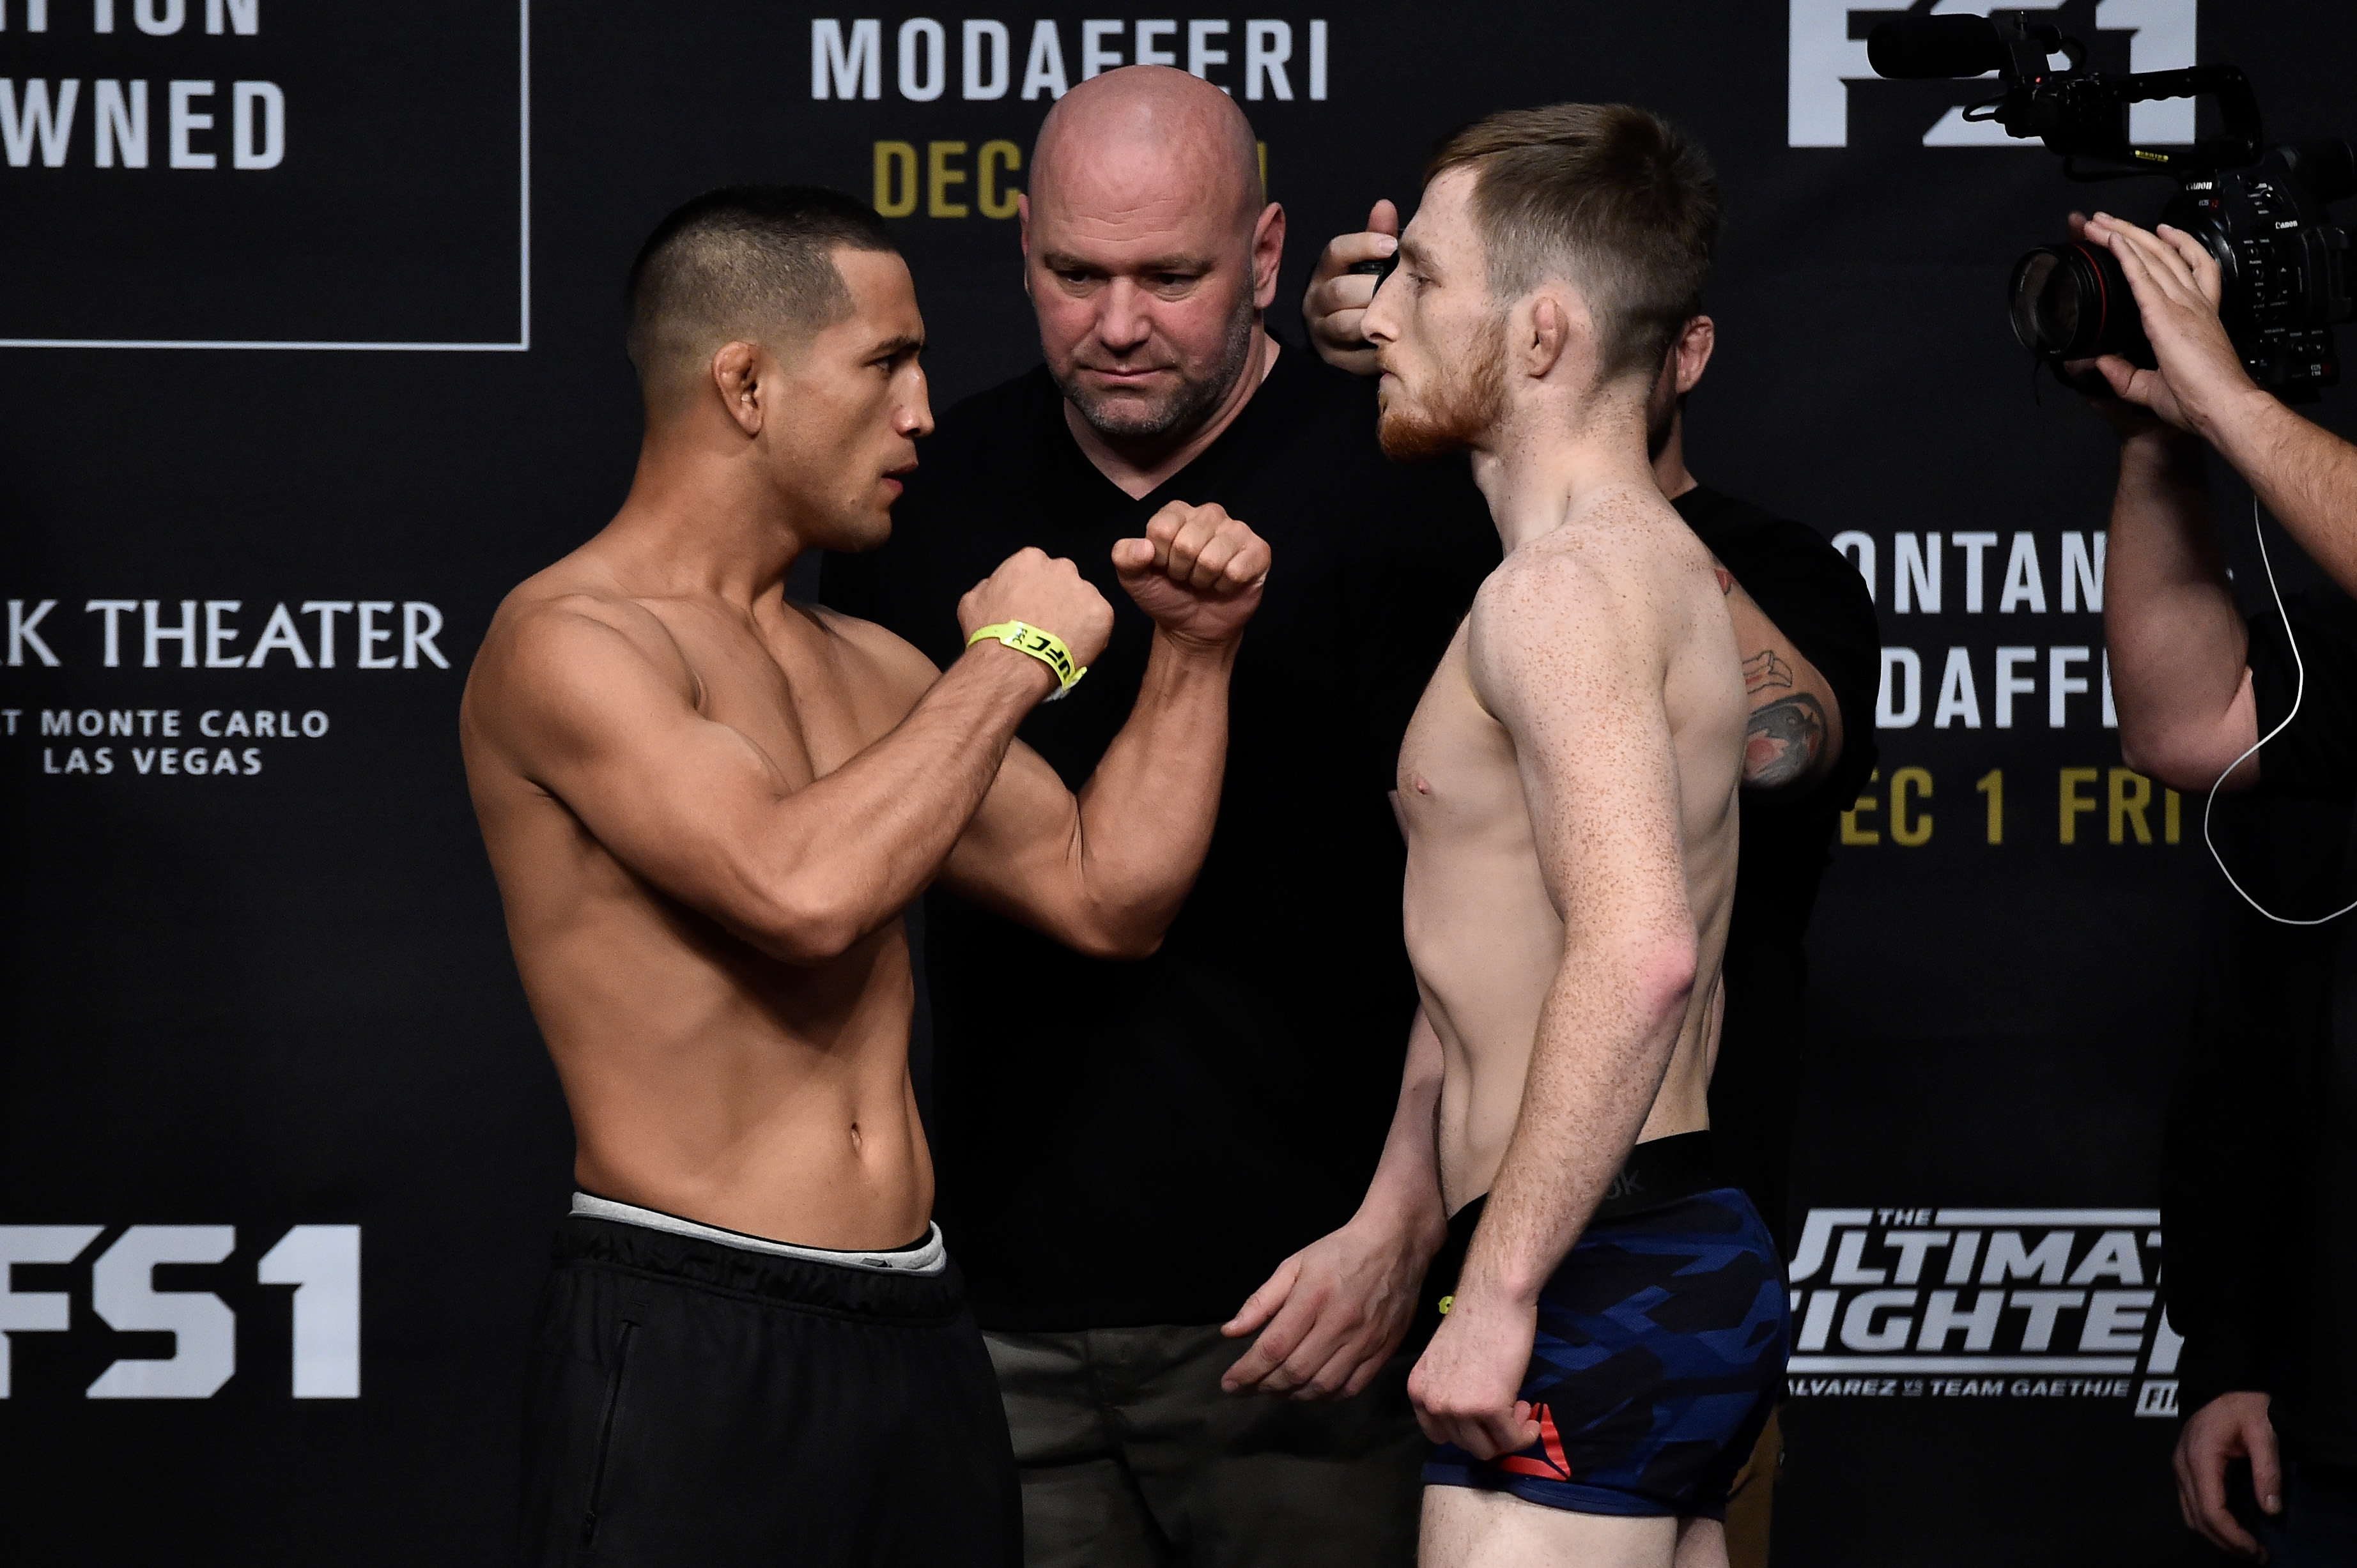 UFC Ultimate Fighter 26 Finale Weigh-In